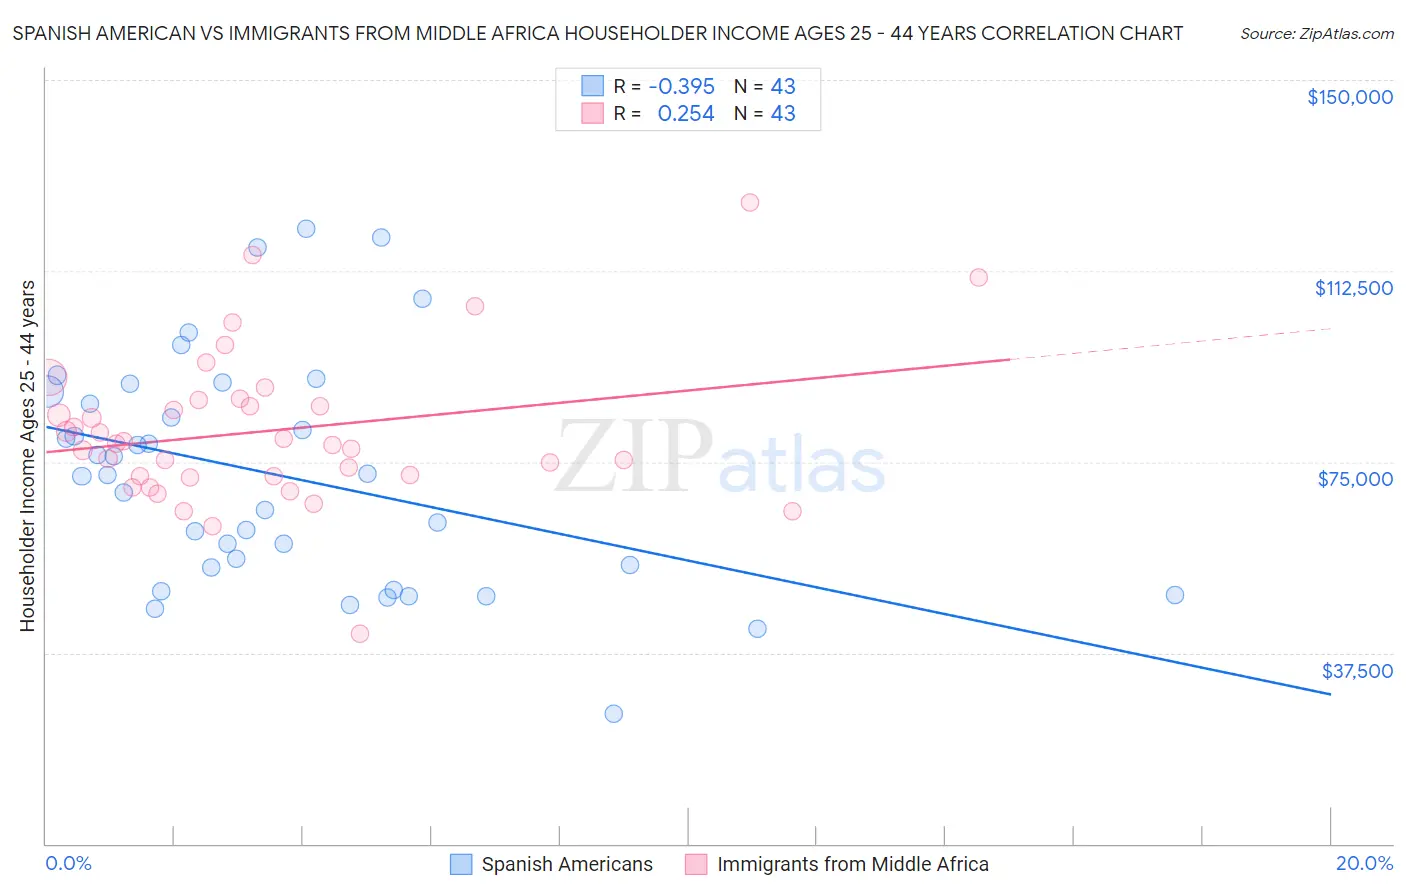 Spanish American vs Immigrants from Middle Africa Householder Income Ages 25 - 44 years